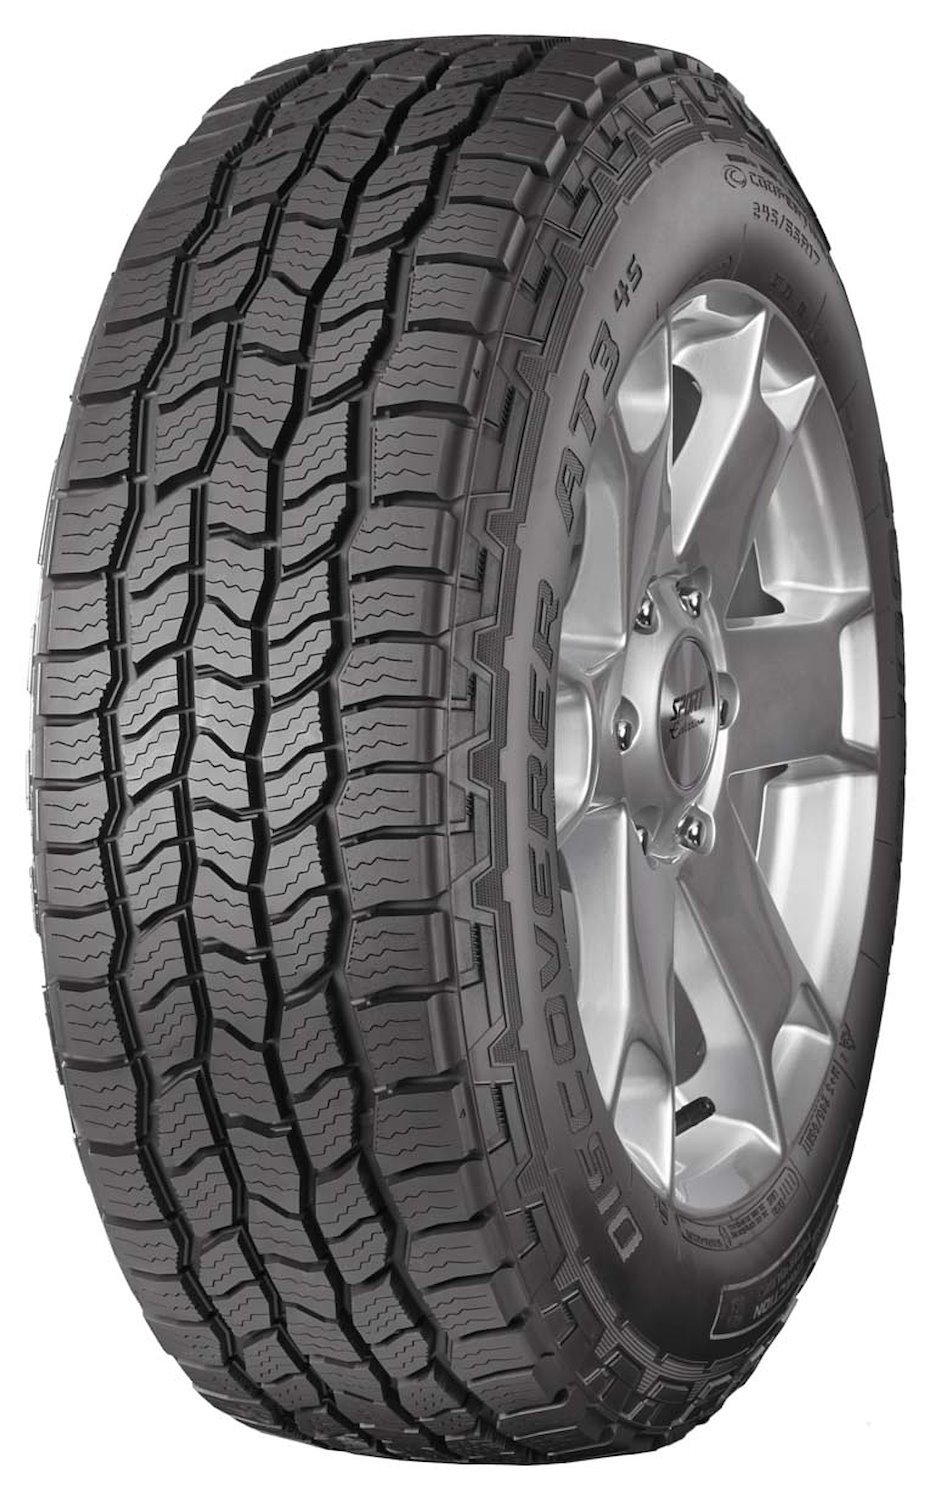 Discoverer AT3 4S All-Terrain Tire, 265/65R18